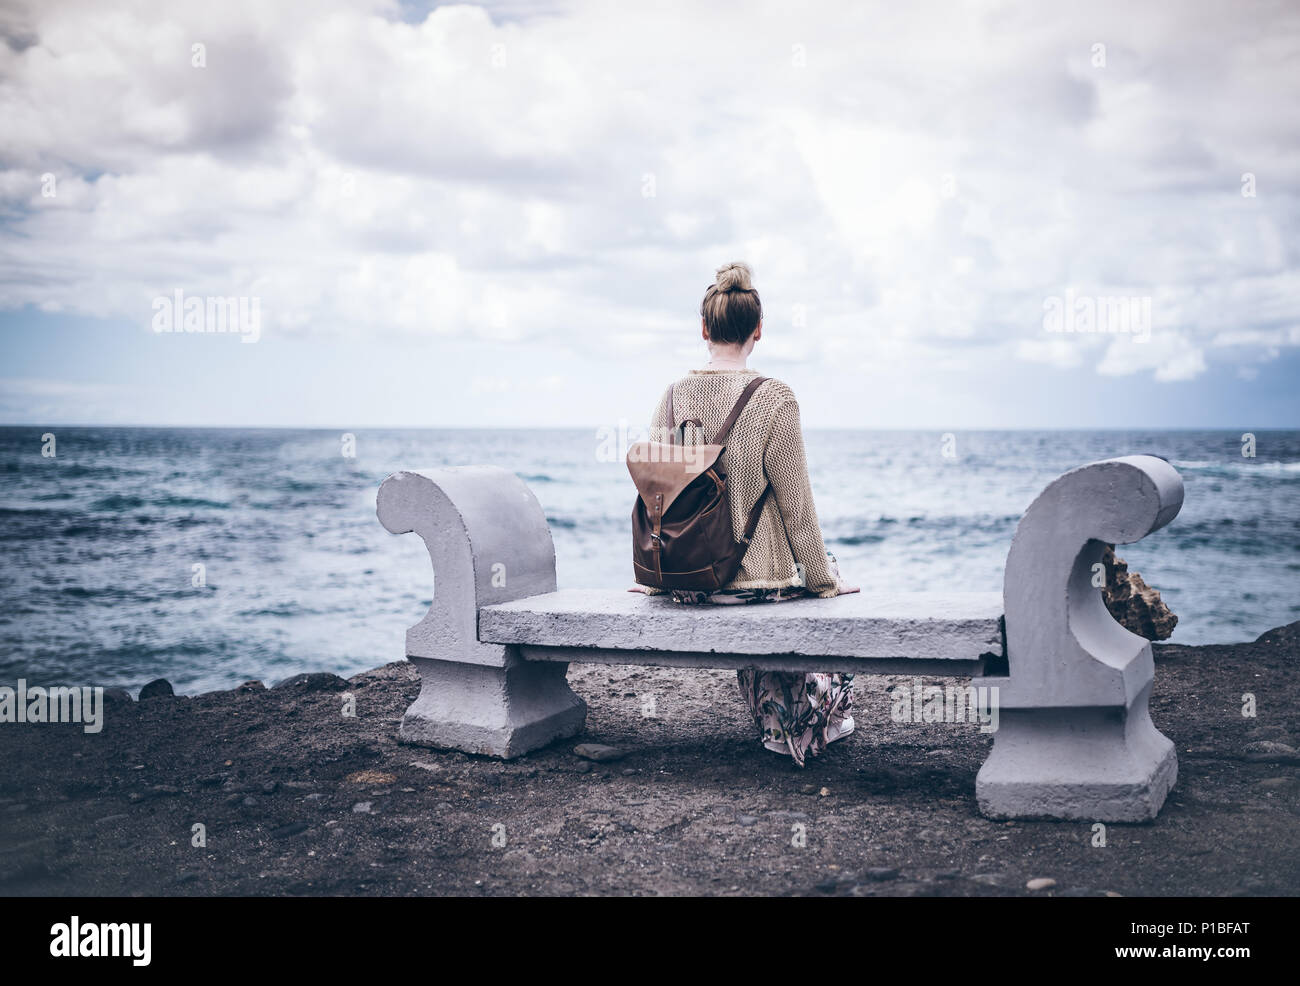 back view of young woman in long dress and with backpack sitting on stone bench by sea Stock Photo